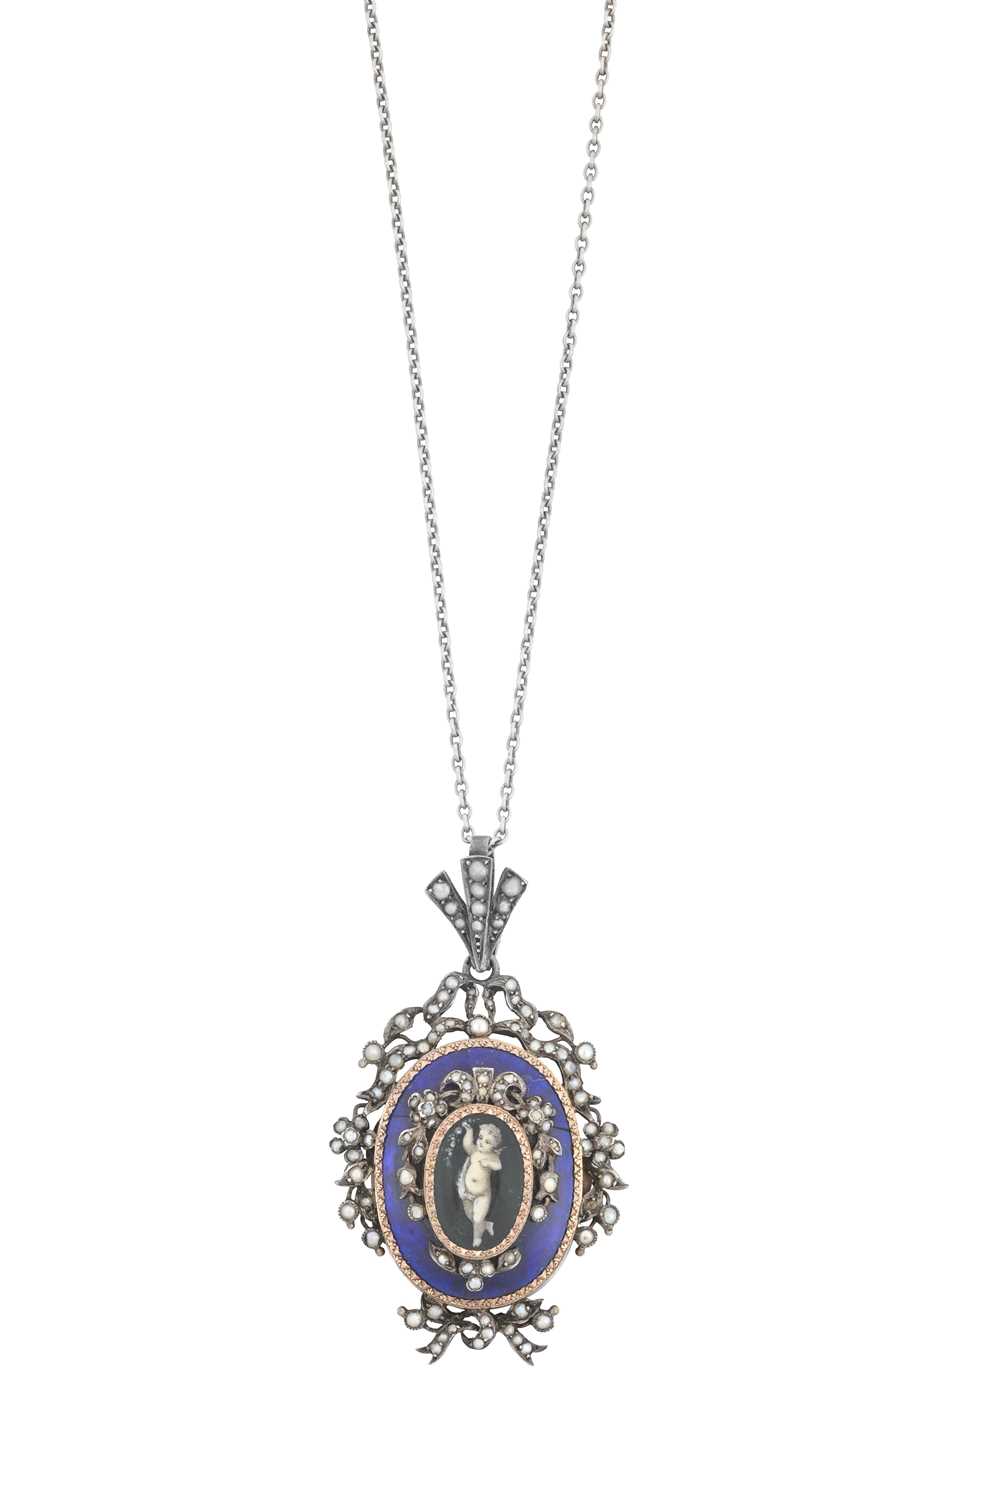 An Enamel and Split Pearl Pendant on Chain, circa 1815 the central locket compartment containing a